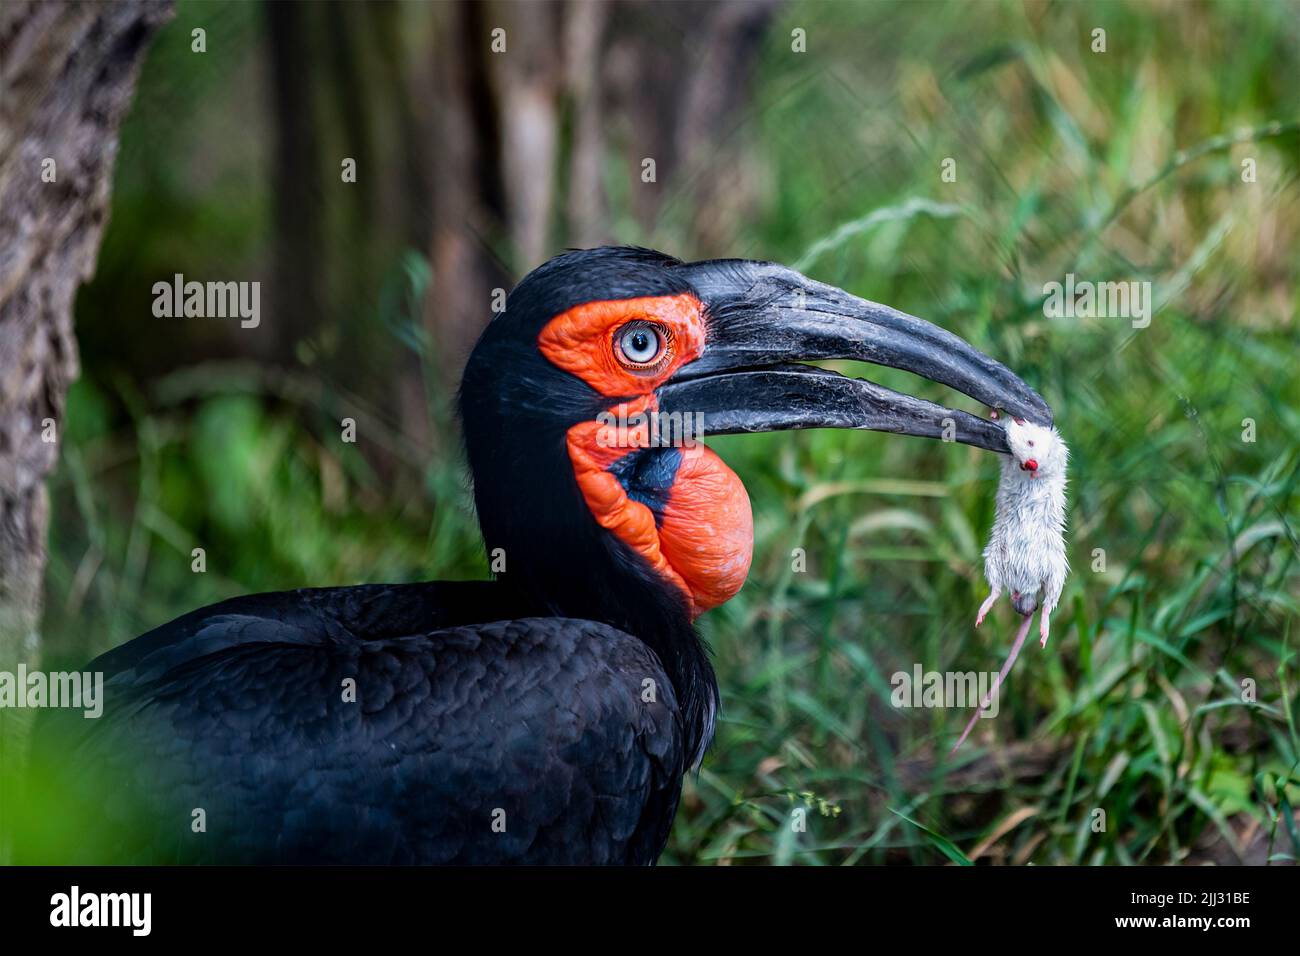 Southern ground hornbill in the forest. Hornbill eats a mouse against the background of green foliage in the forest. Large black bird with red head Stock Photo